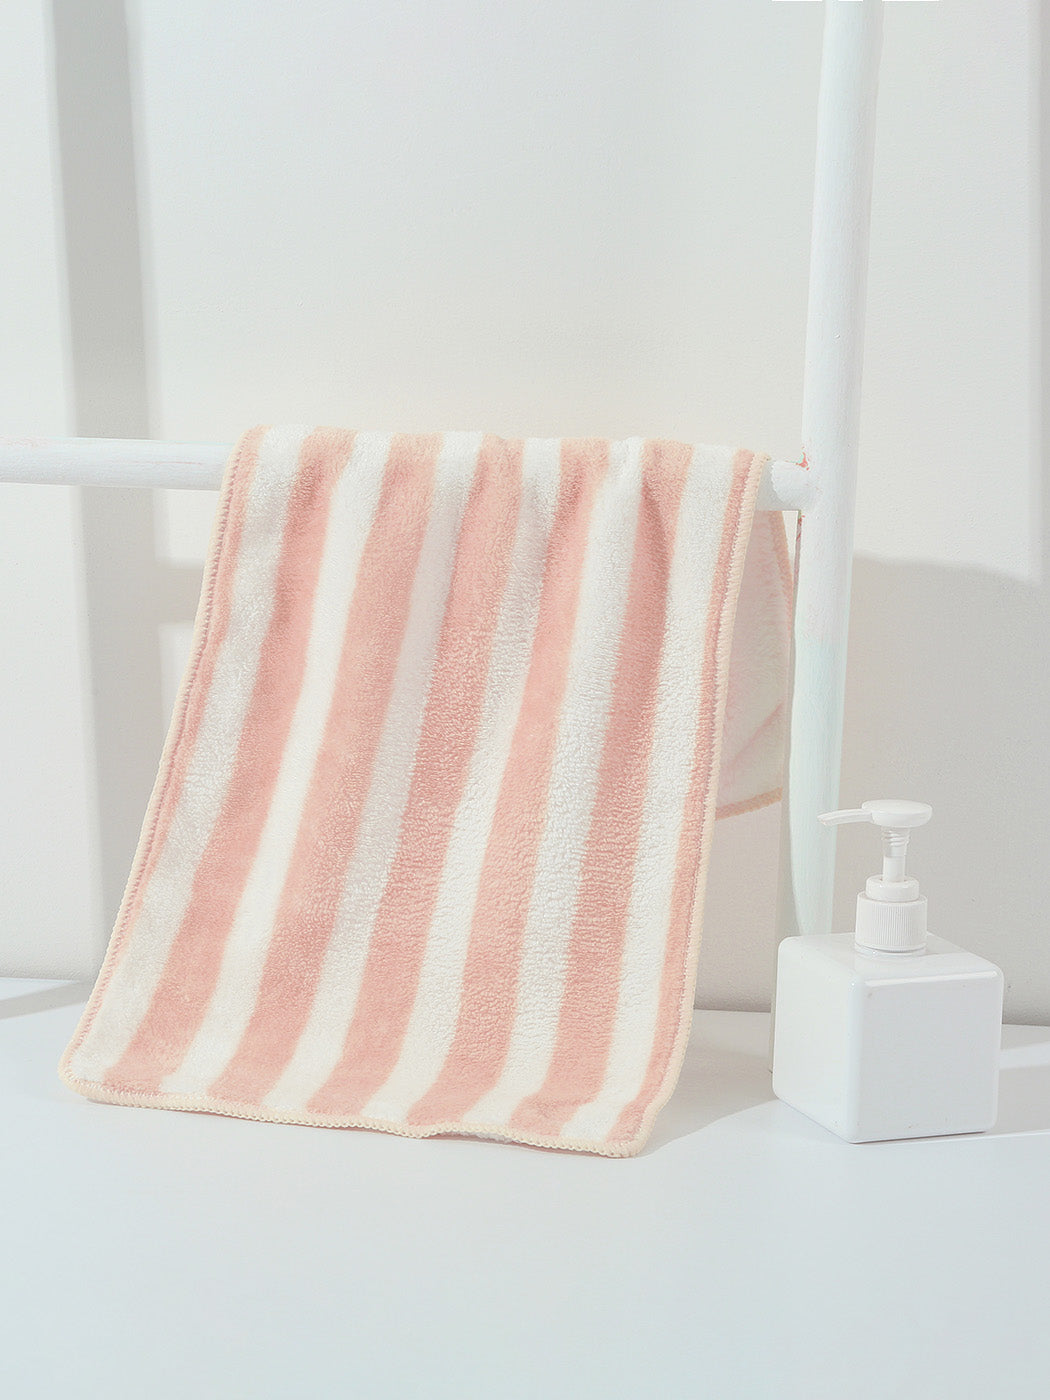 MINISO STRIPED CORAL FLEECE FACE TOWEL FOR KIDS (PINK) 2011443910106 TOWEL